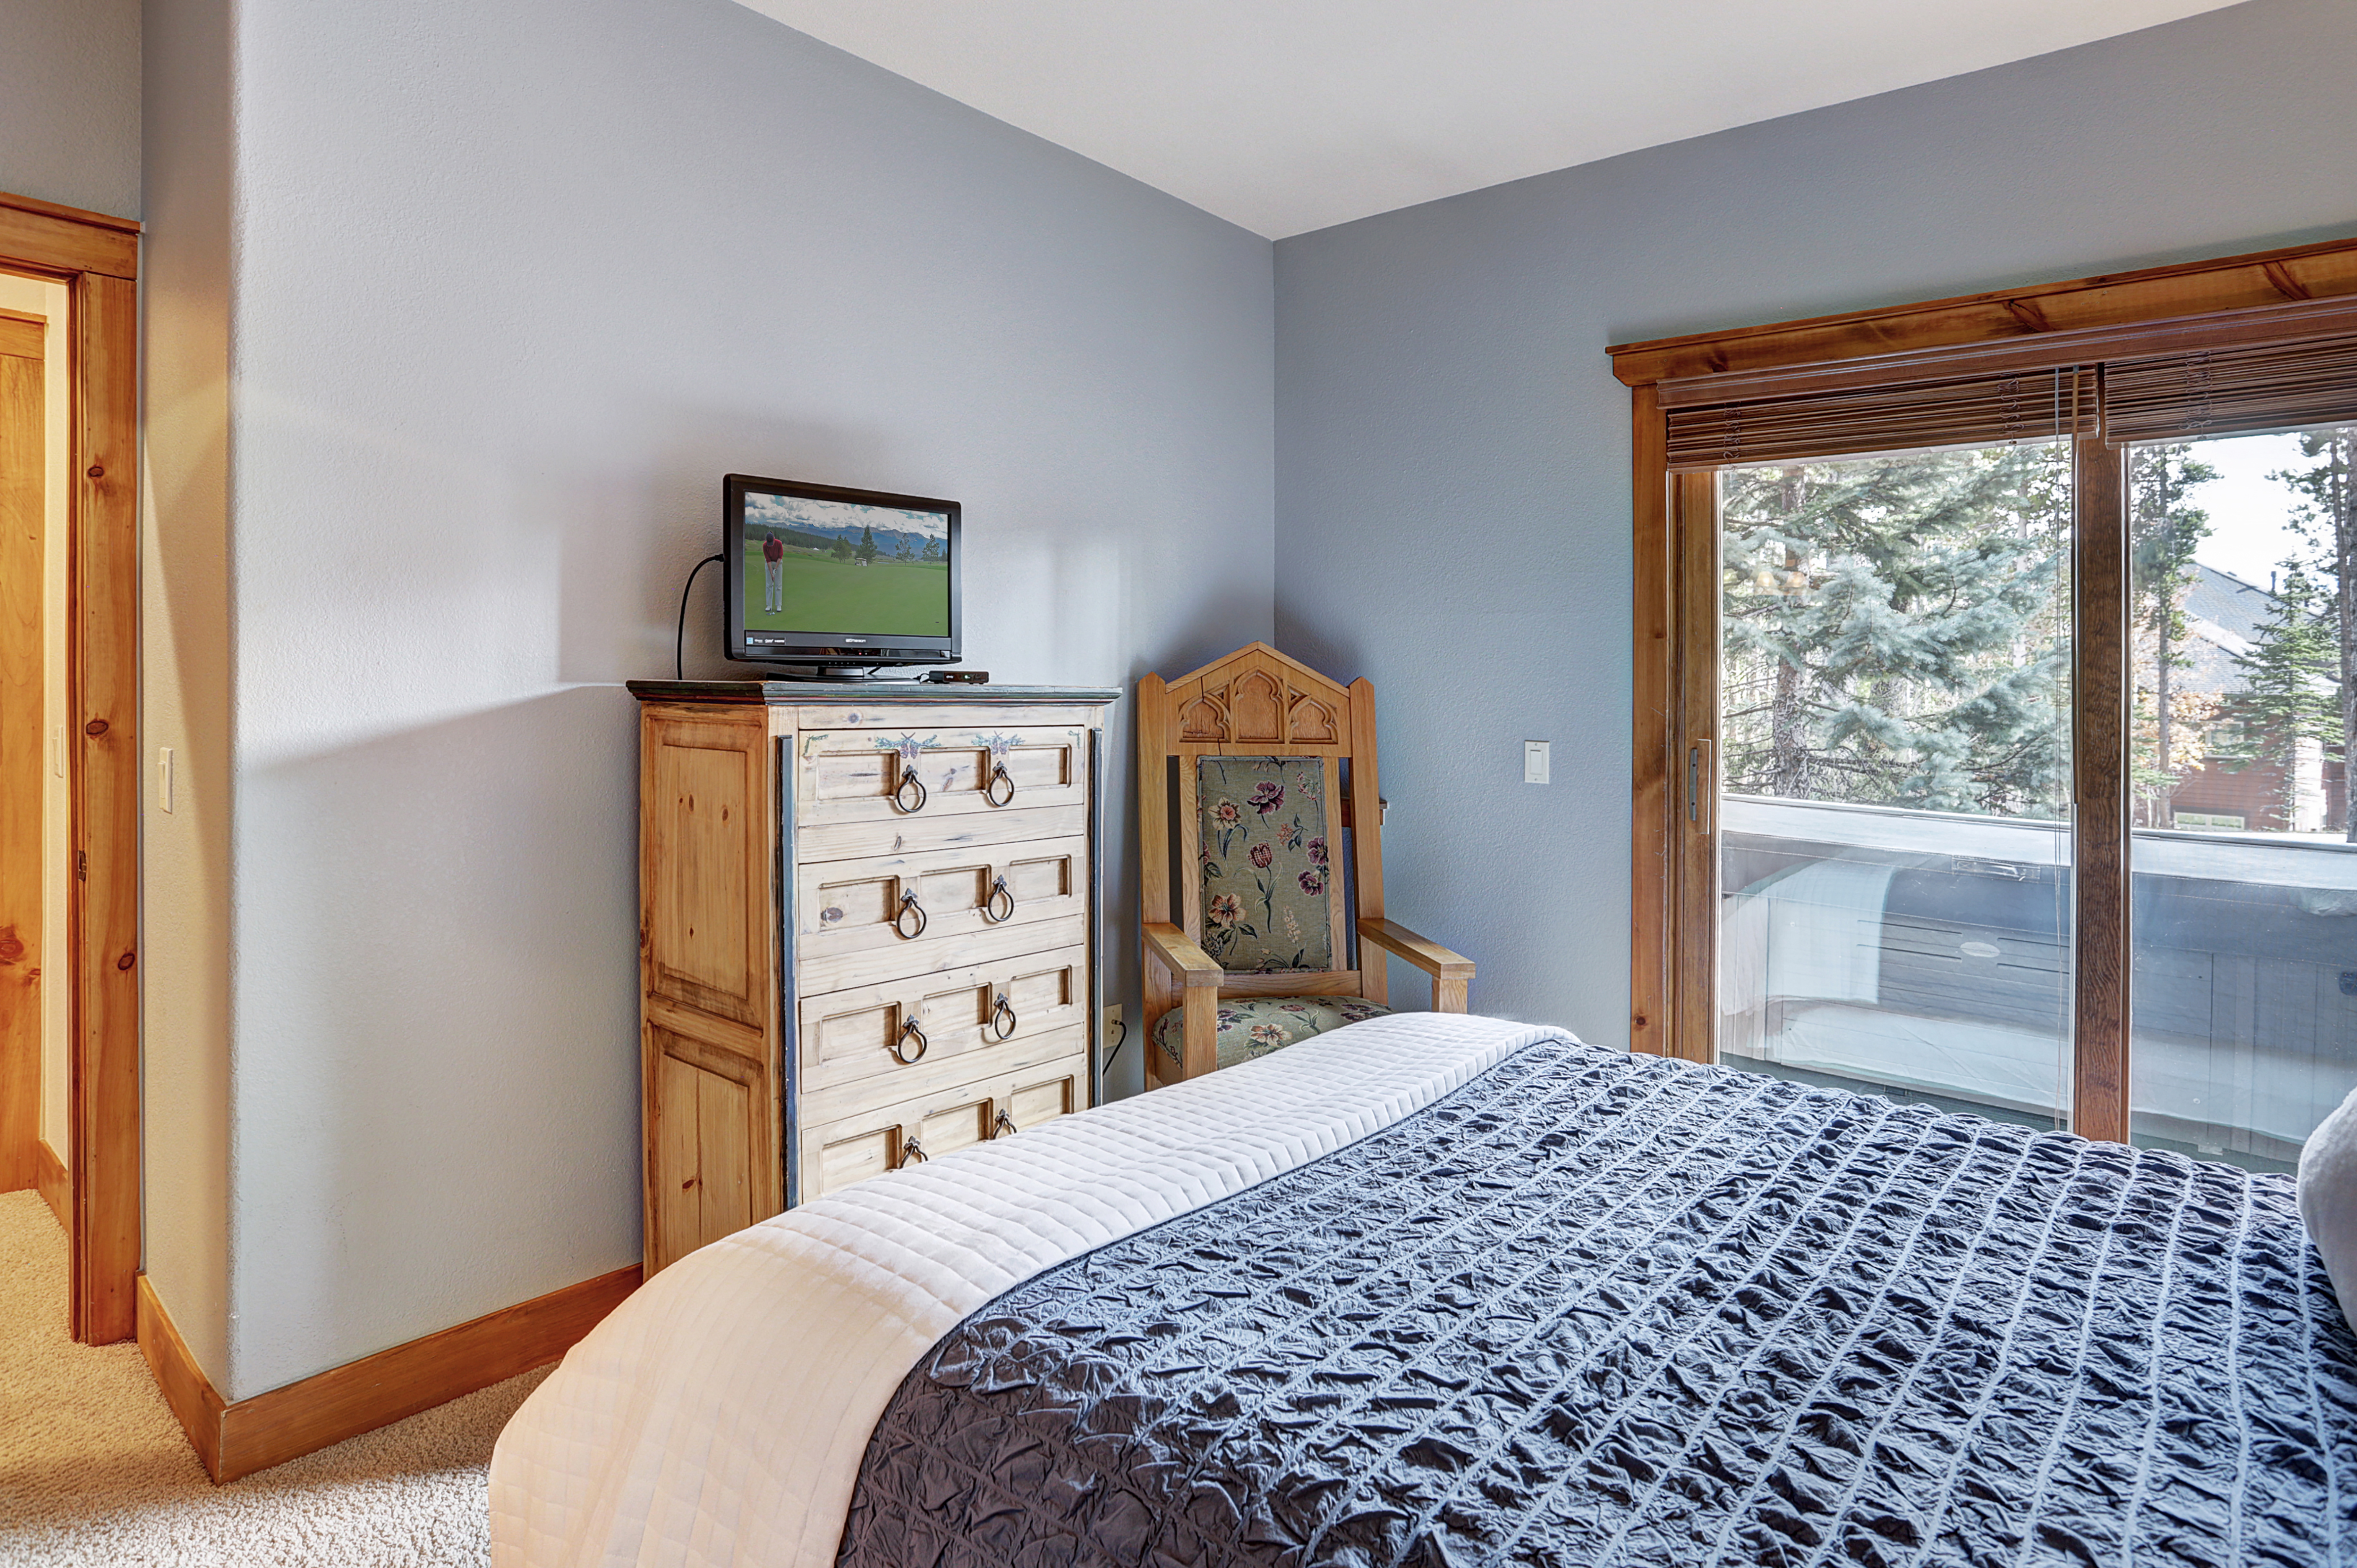 Relax and wind down in this cozy queen bedroom - Amber Sky Breckenridge Vacation Rental